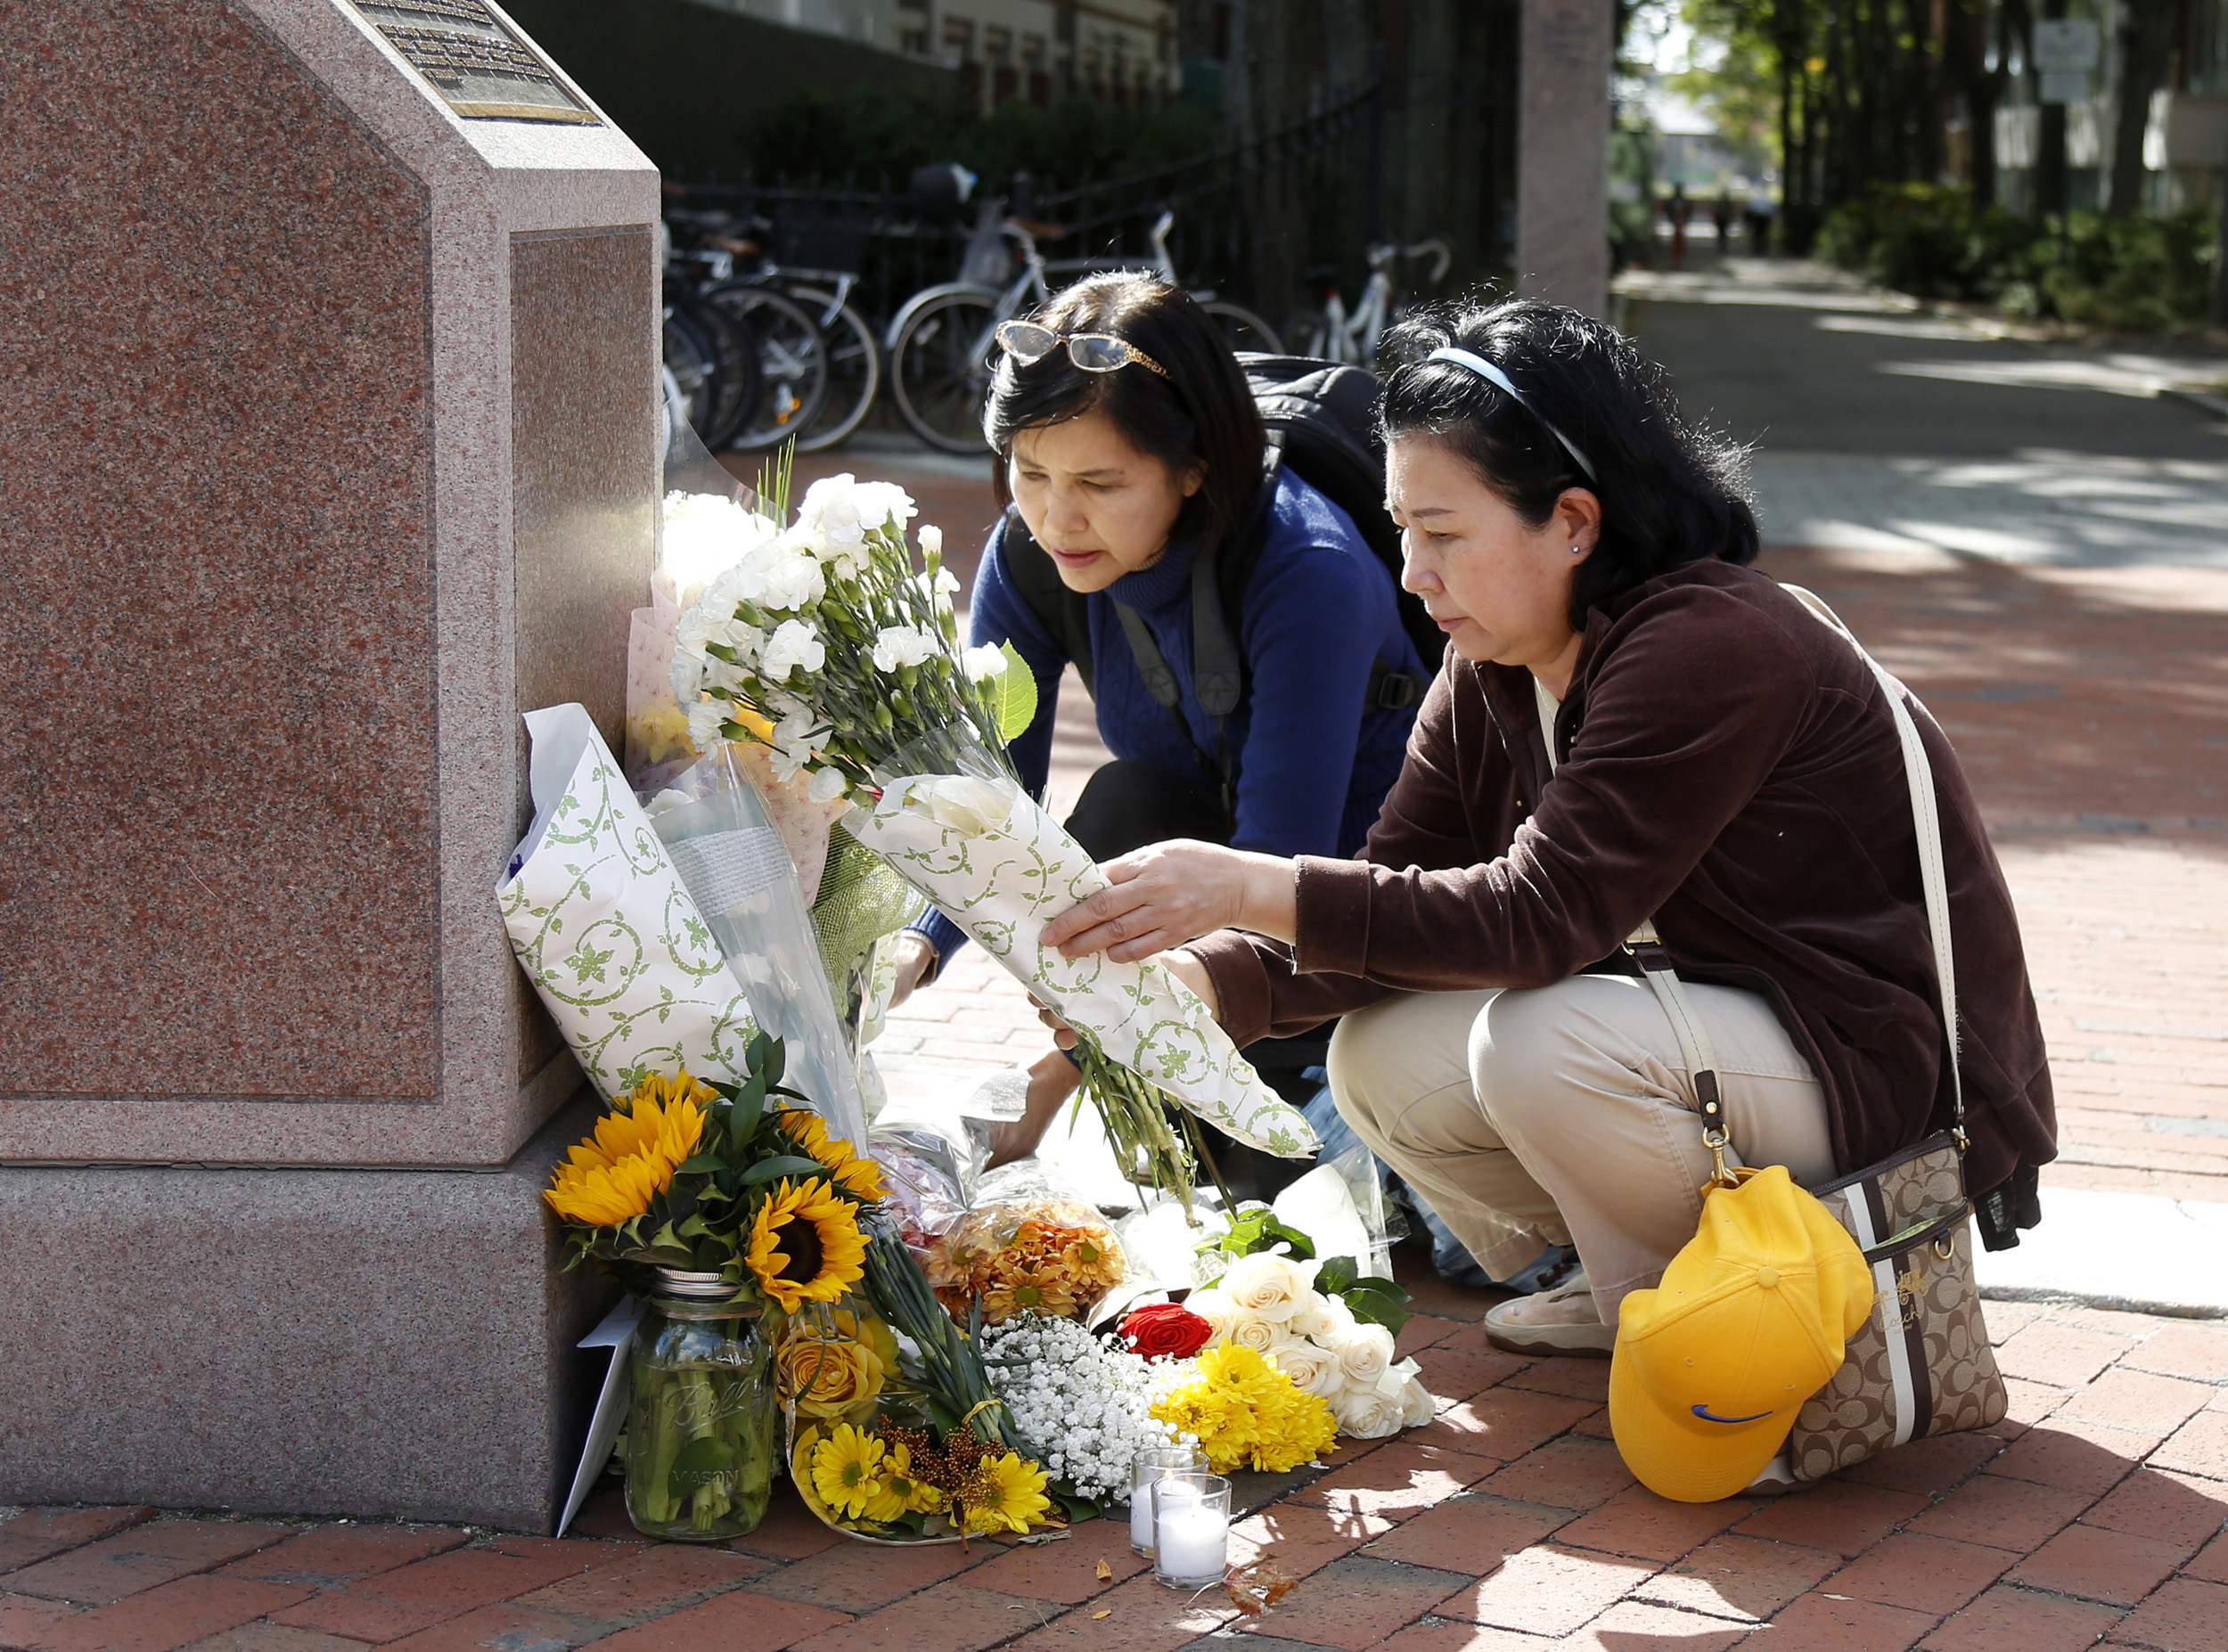 Nayara Amatquanich (C) and Anchulee Astadonwu, both tourists from Thailand, lay flowers and a candle at King Bhumibol Adulyadej Square on October 13, 2016 in Cambridge, Massachusetts. Thailand's King Bhumibol Adulyadej, the world's longest-reigning monarch, has died at the age of 88, the palace announced on October 13, leaving a divided nation bereft of a rare figure of unity. / AFP PHOTO / Mary Schwalm